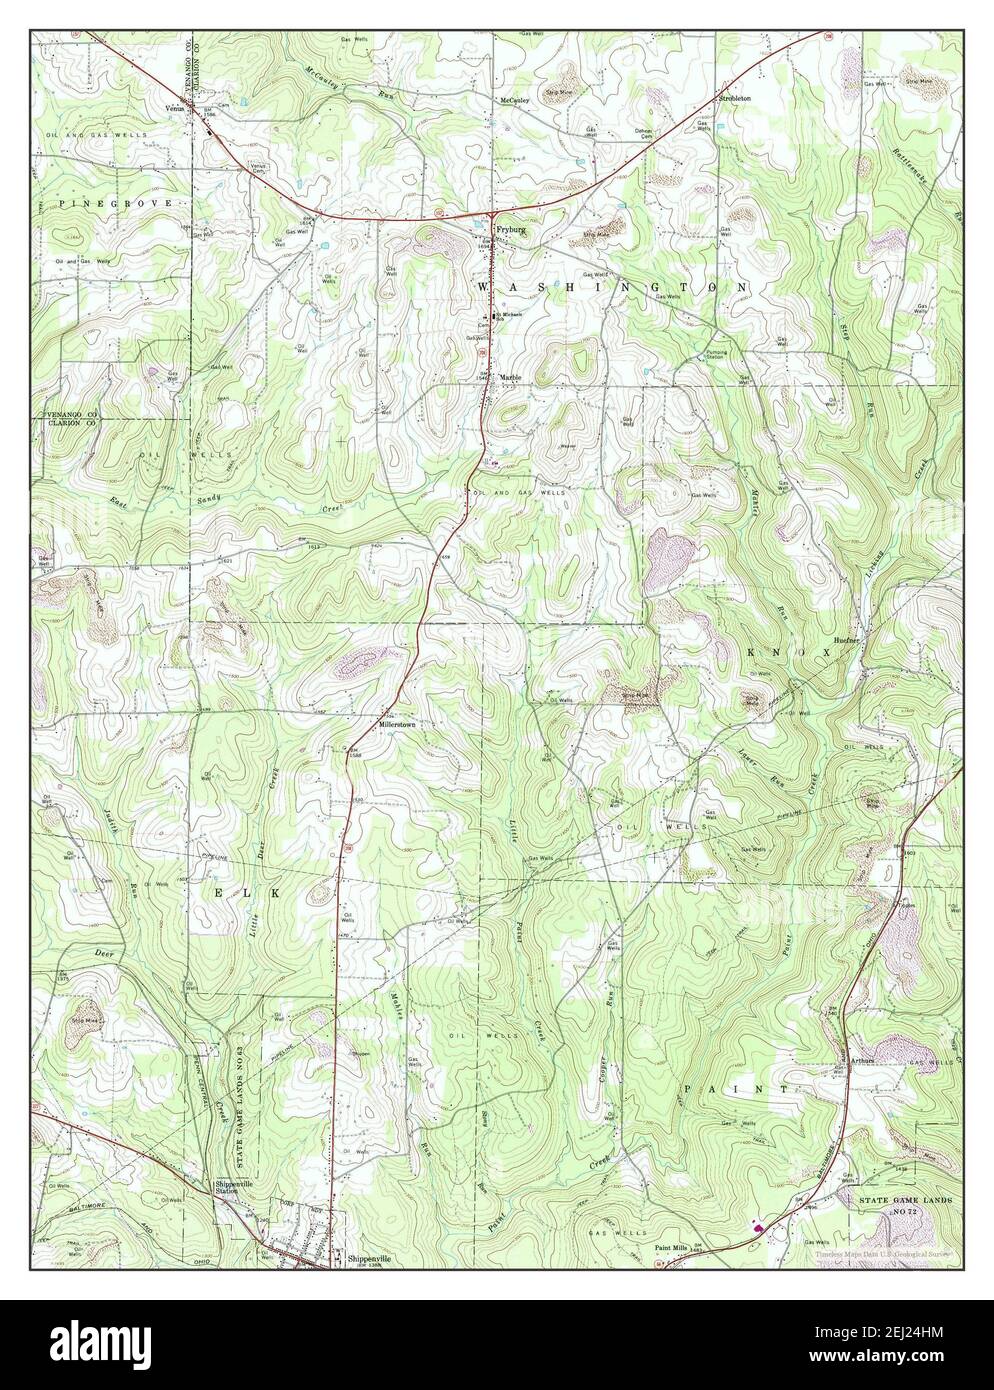 Fryburg, Pennsylvania, map 1967, 1:24000, United States of America by Timeless Maps, data U.S. Geological Survey Stock Photo